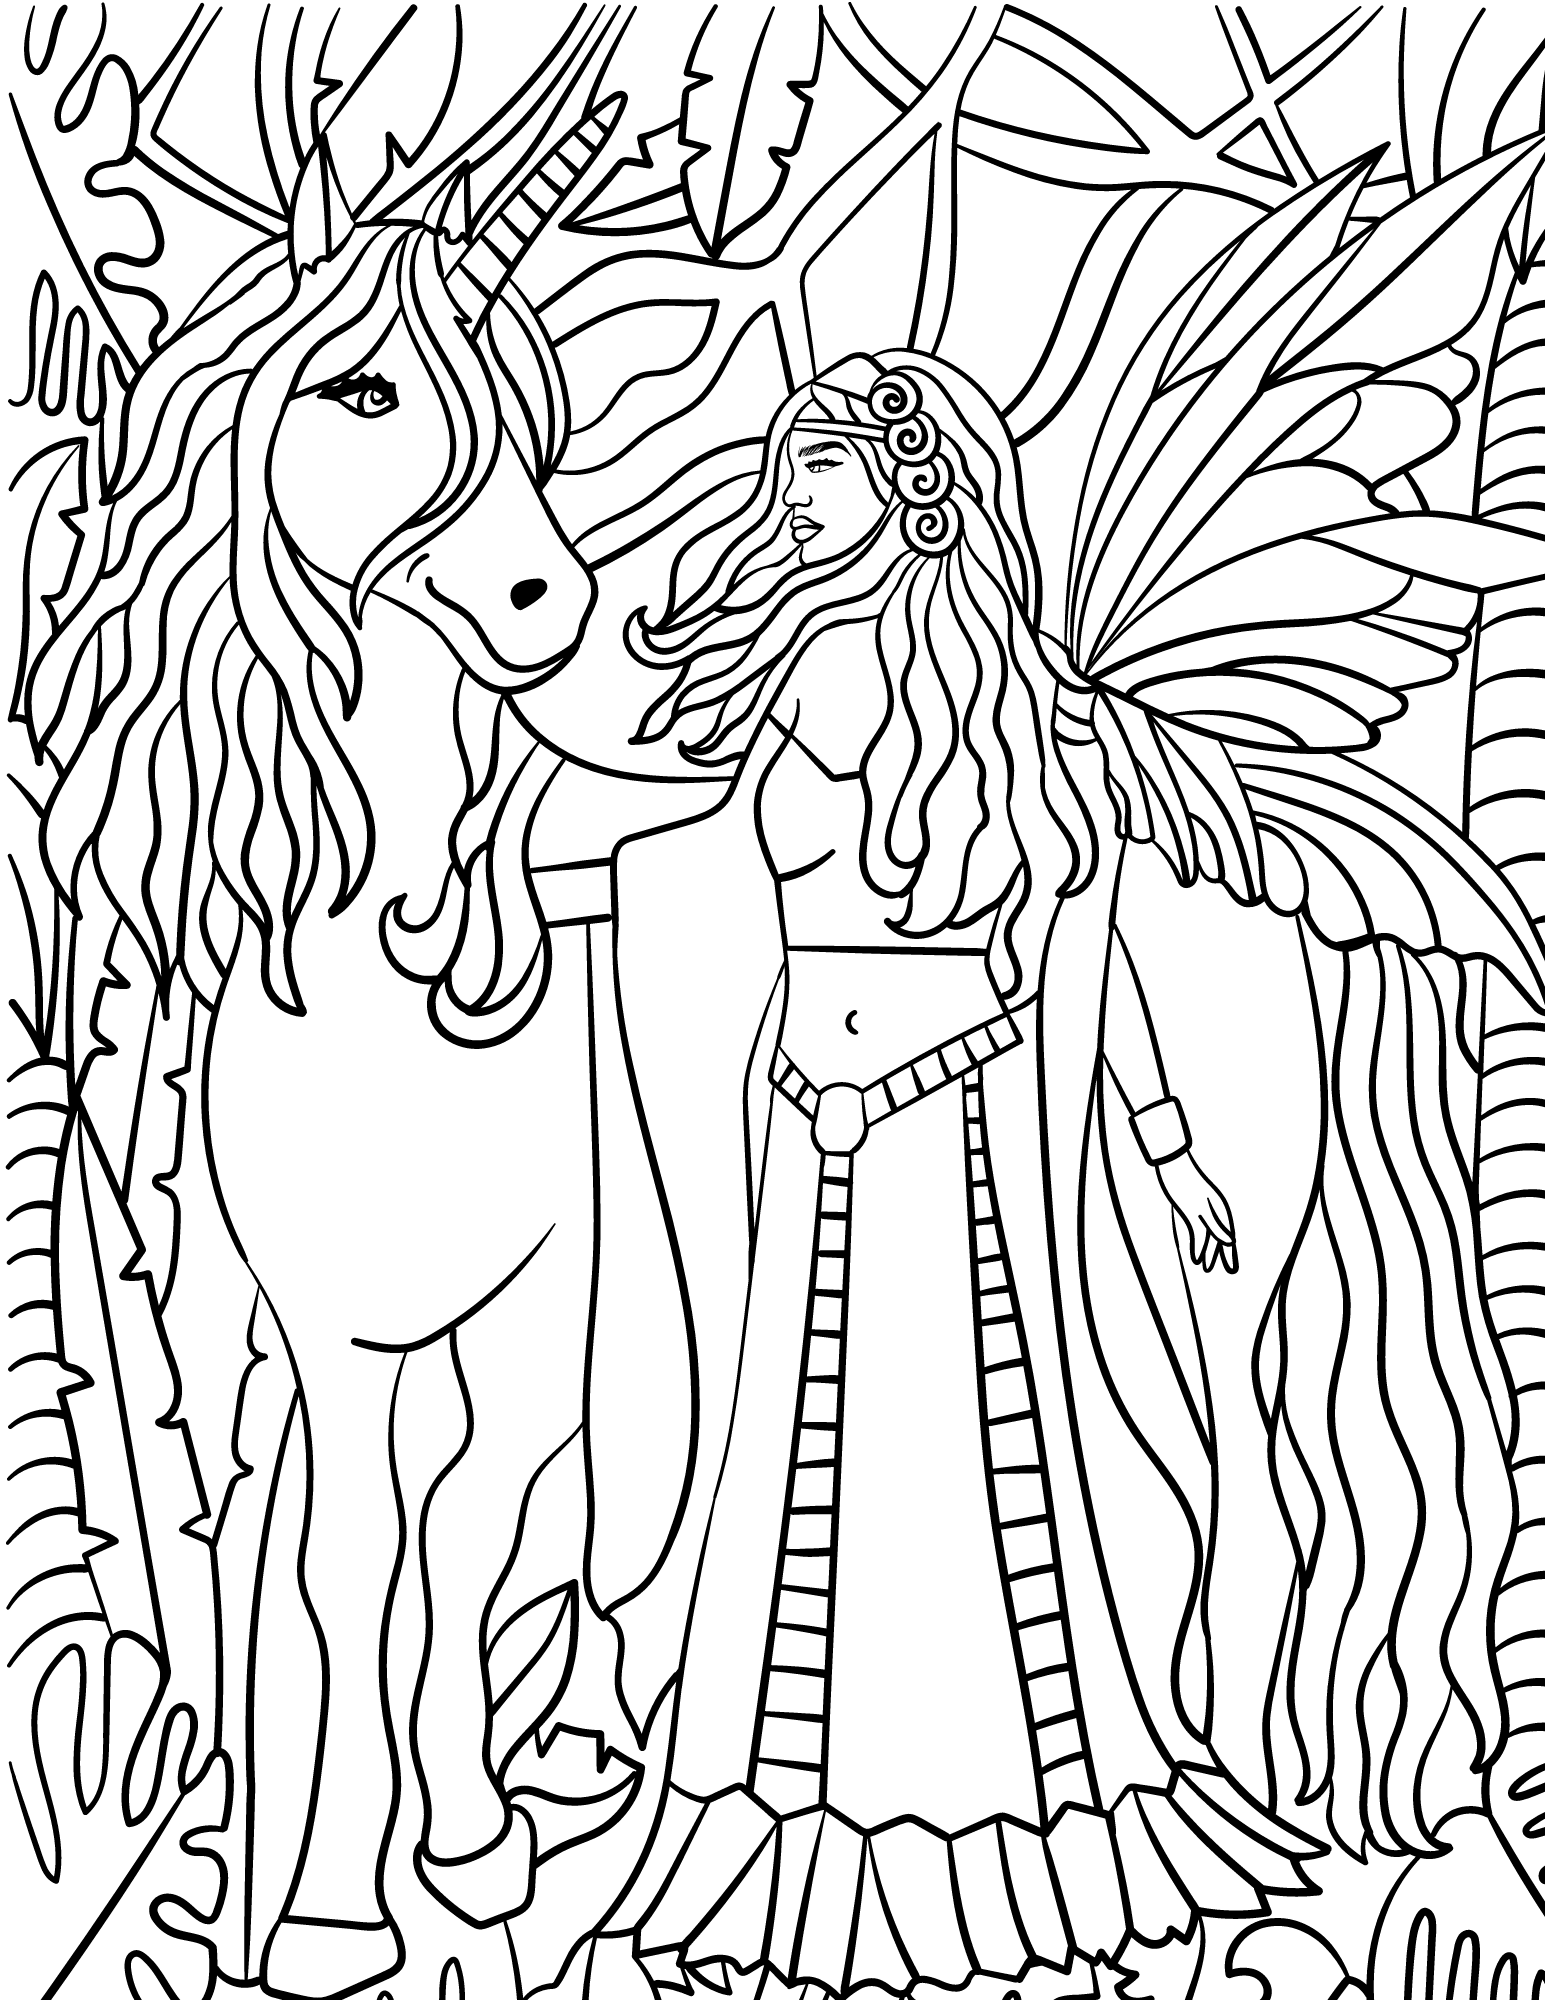 Free fairy coloring pages for kids and adults